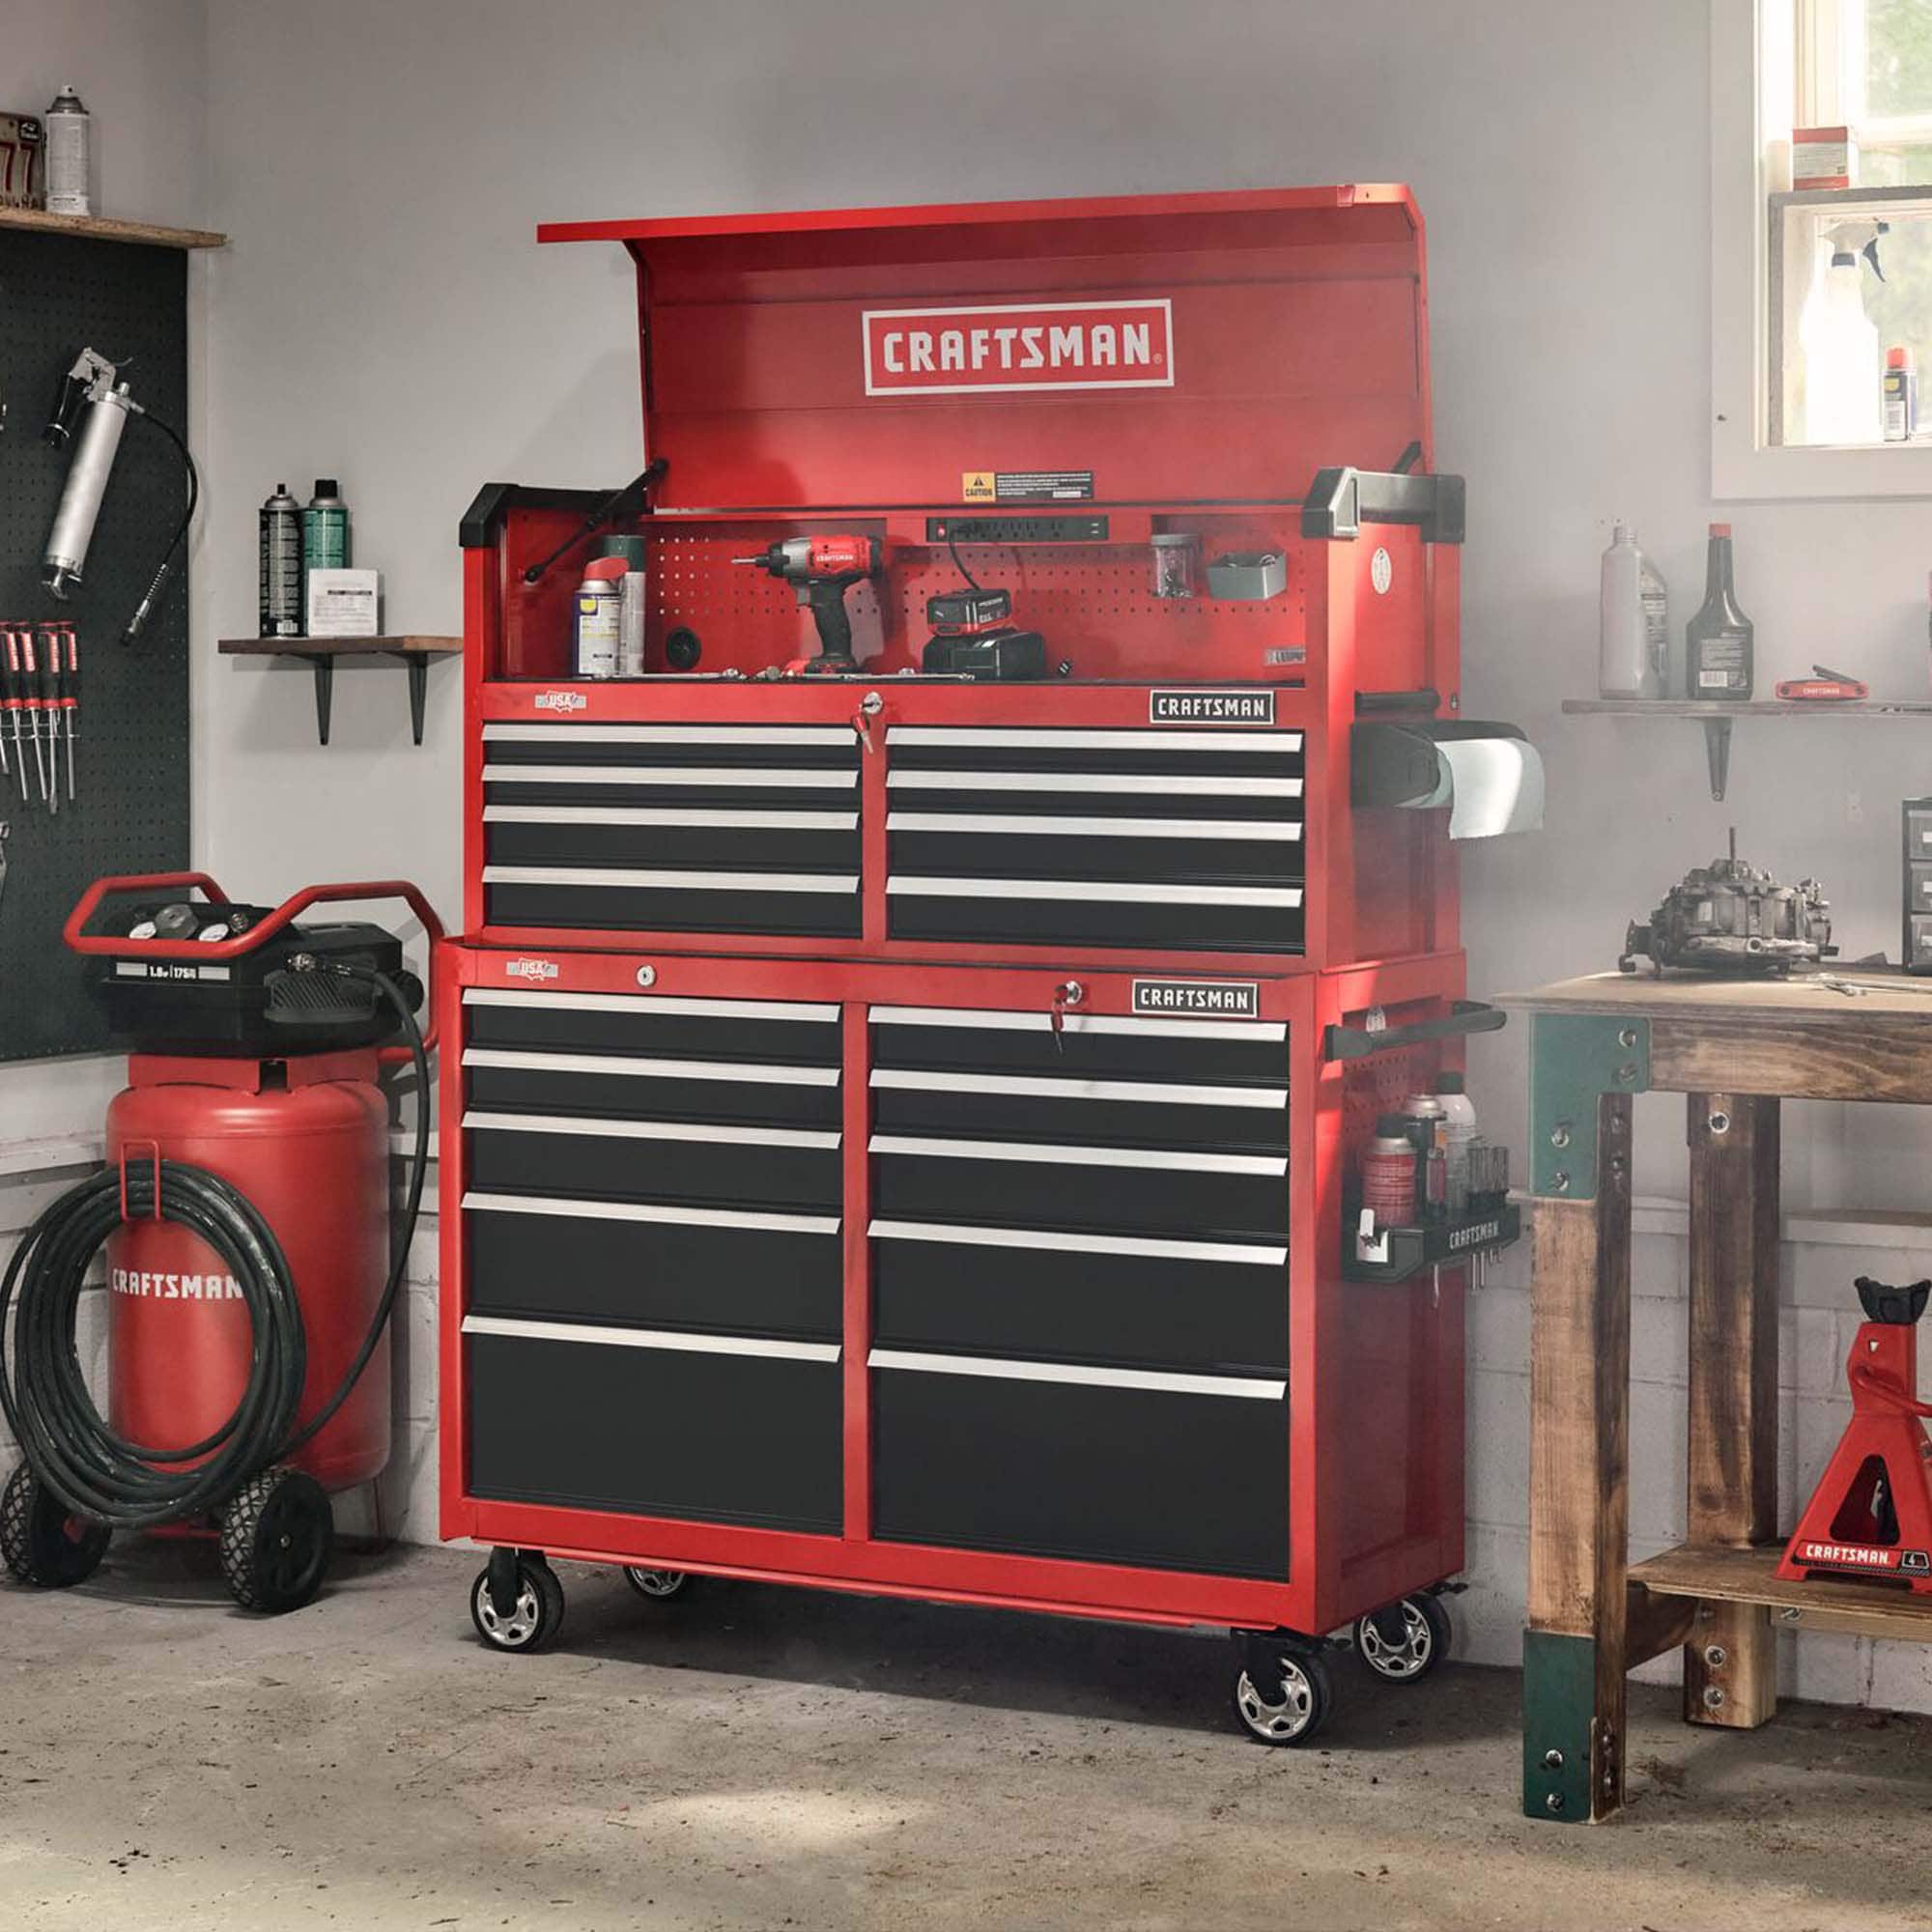 How Good Are Craftsman Tool Boxes? - The Habit of Woodworking